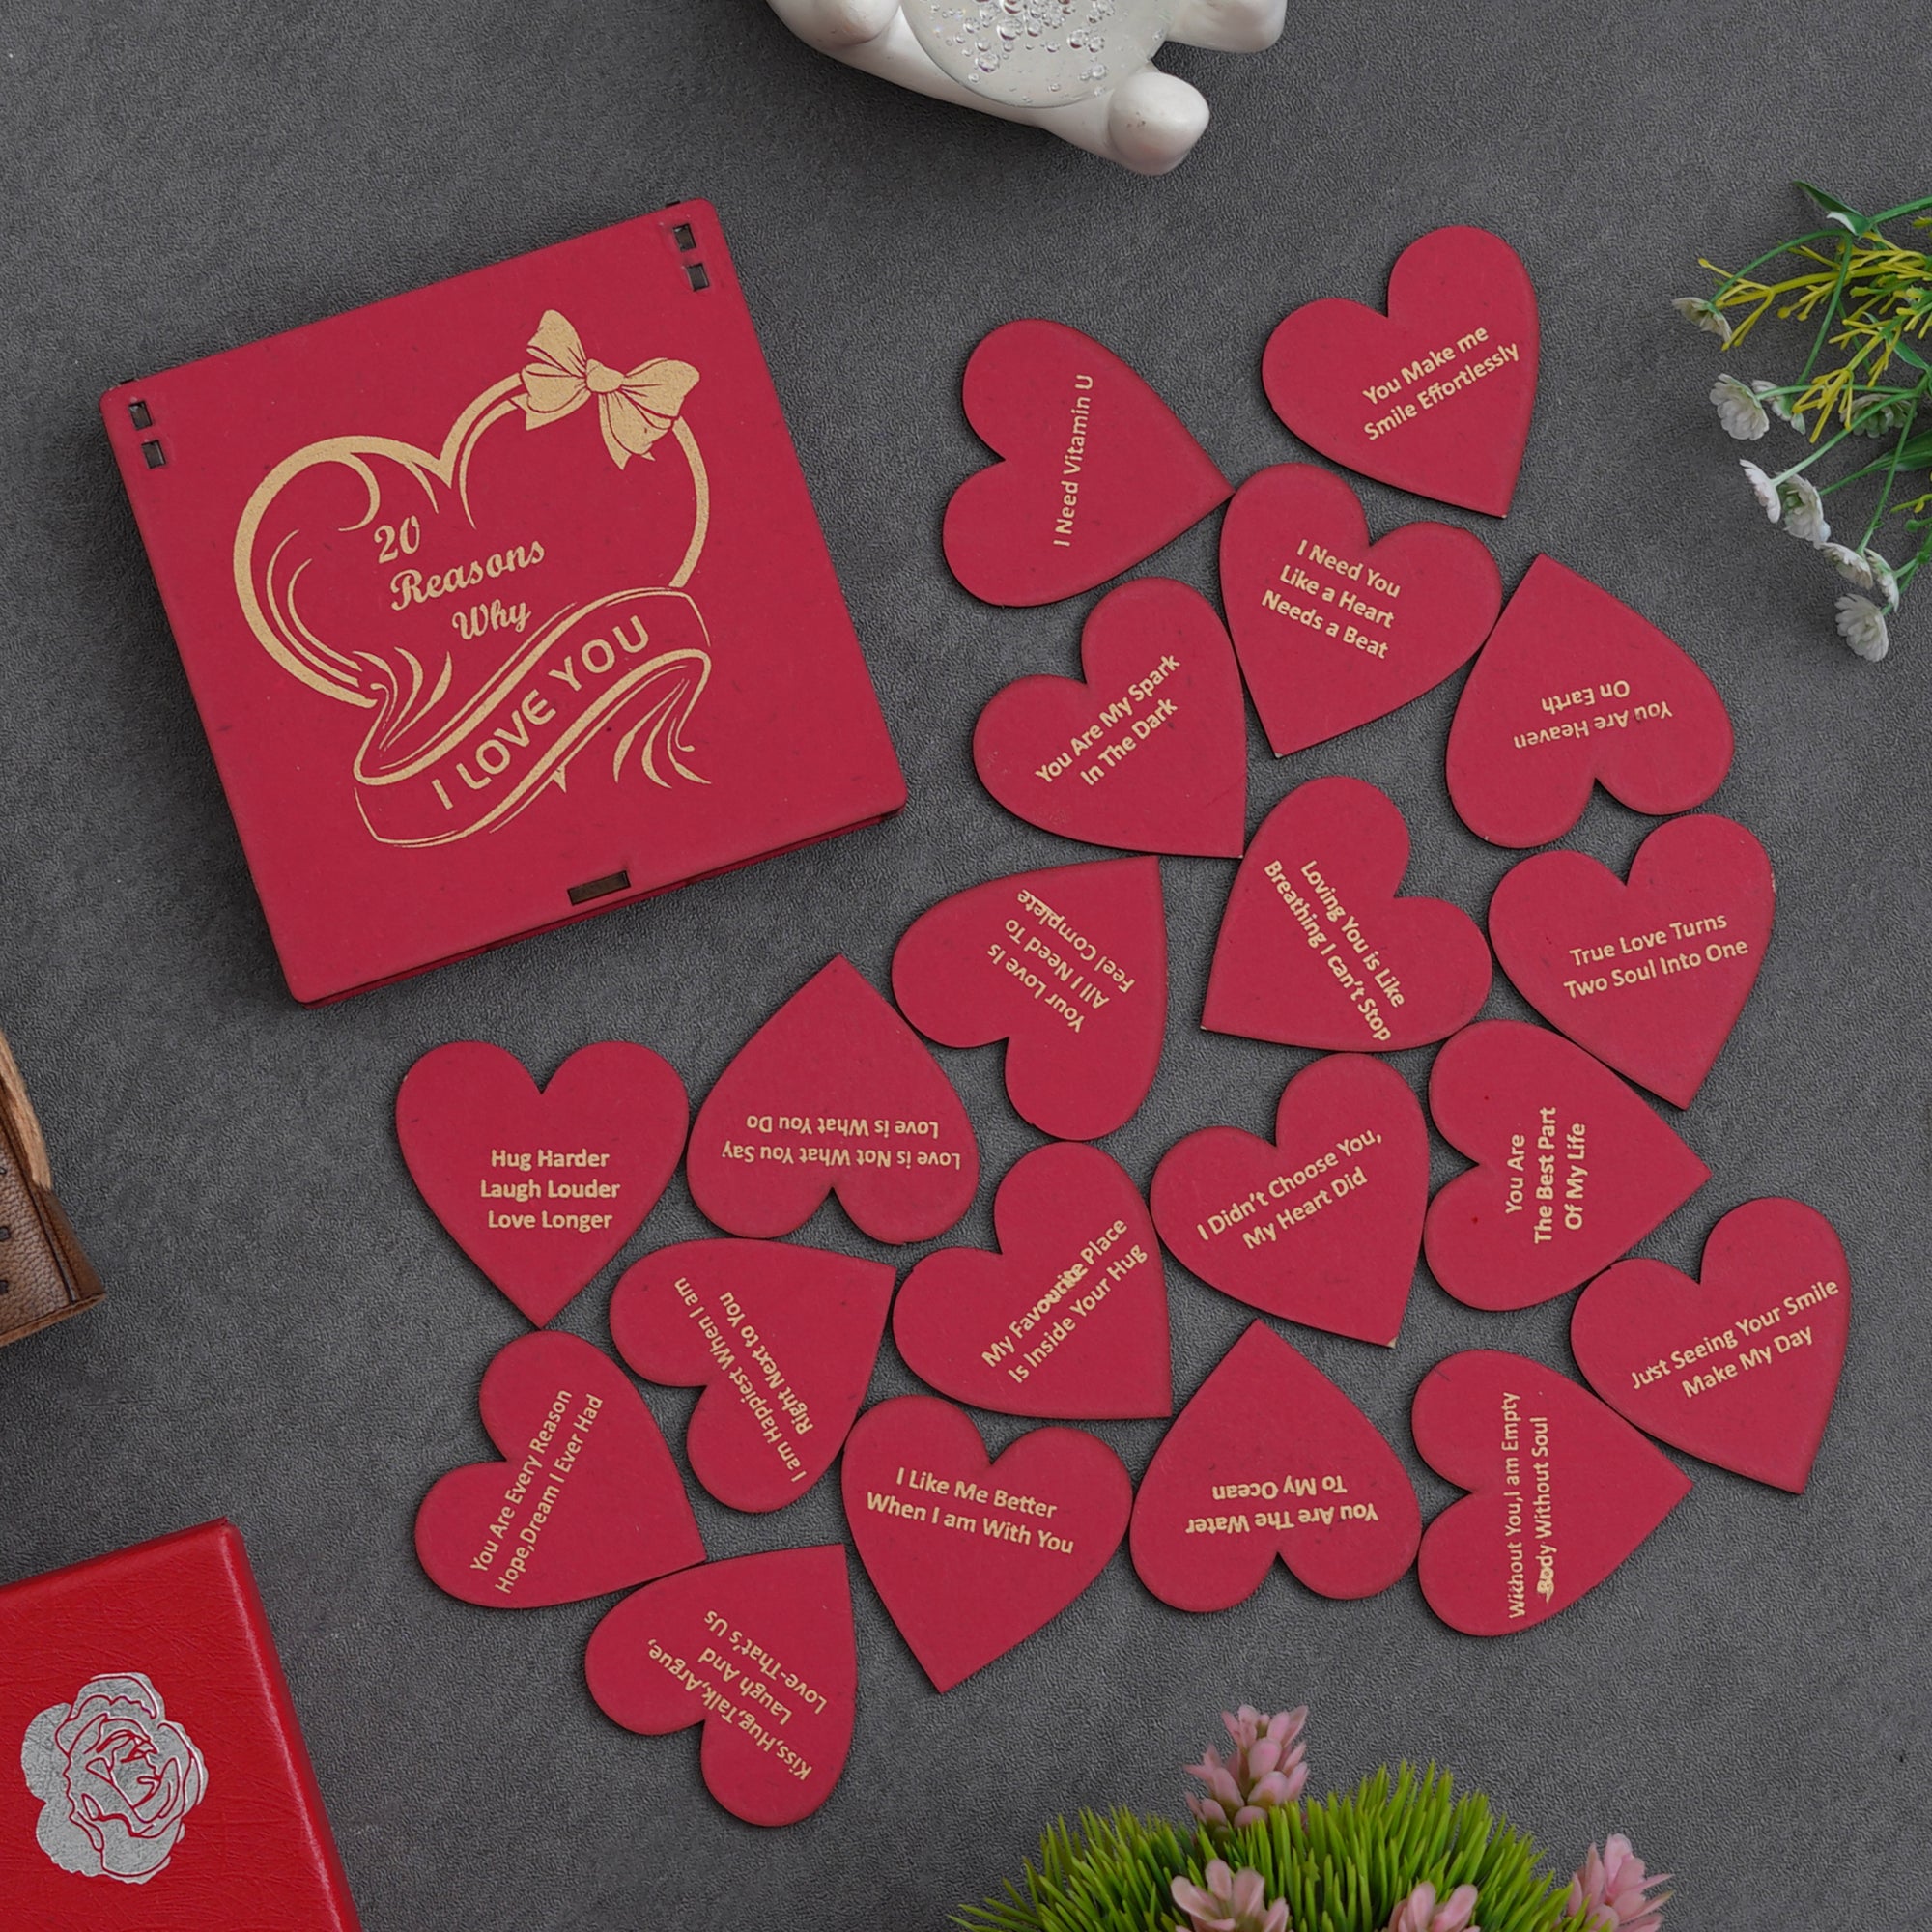 Valentine Combo of Set of 8 Love Post Cards Gift Cards Set, Golden Red Rose Gift Set, "20 Reasons Why I Love You" Printed on Little Red Hearts Decorative Wooden Gift Set Box 5